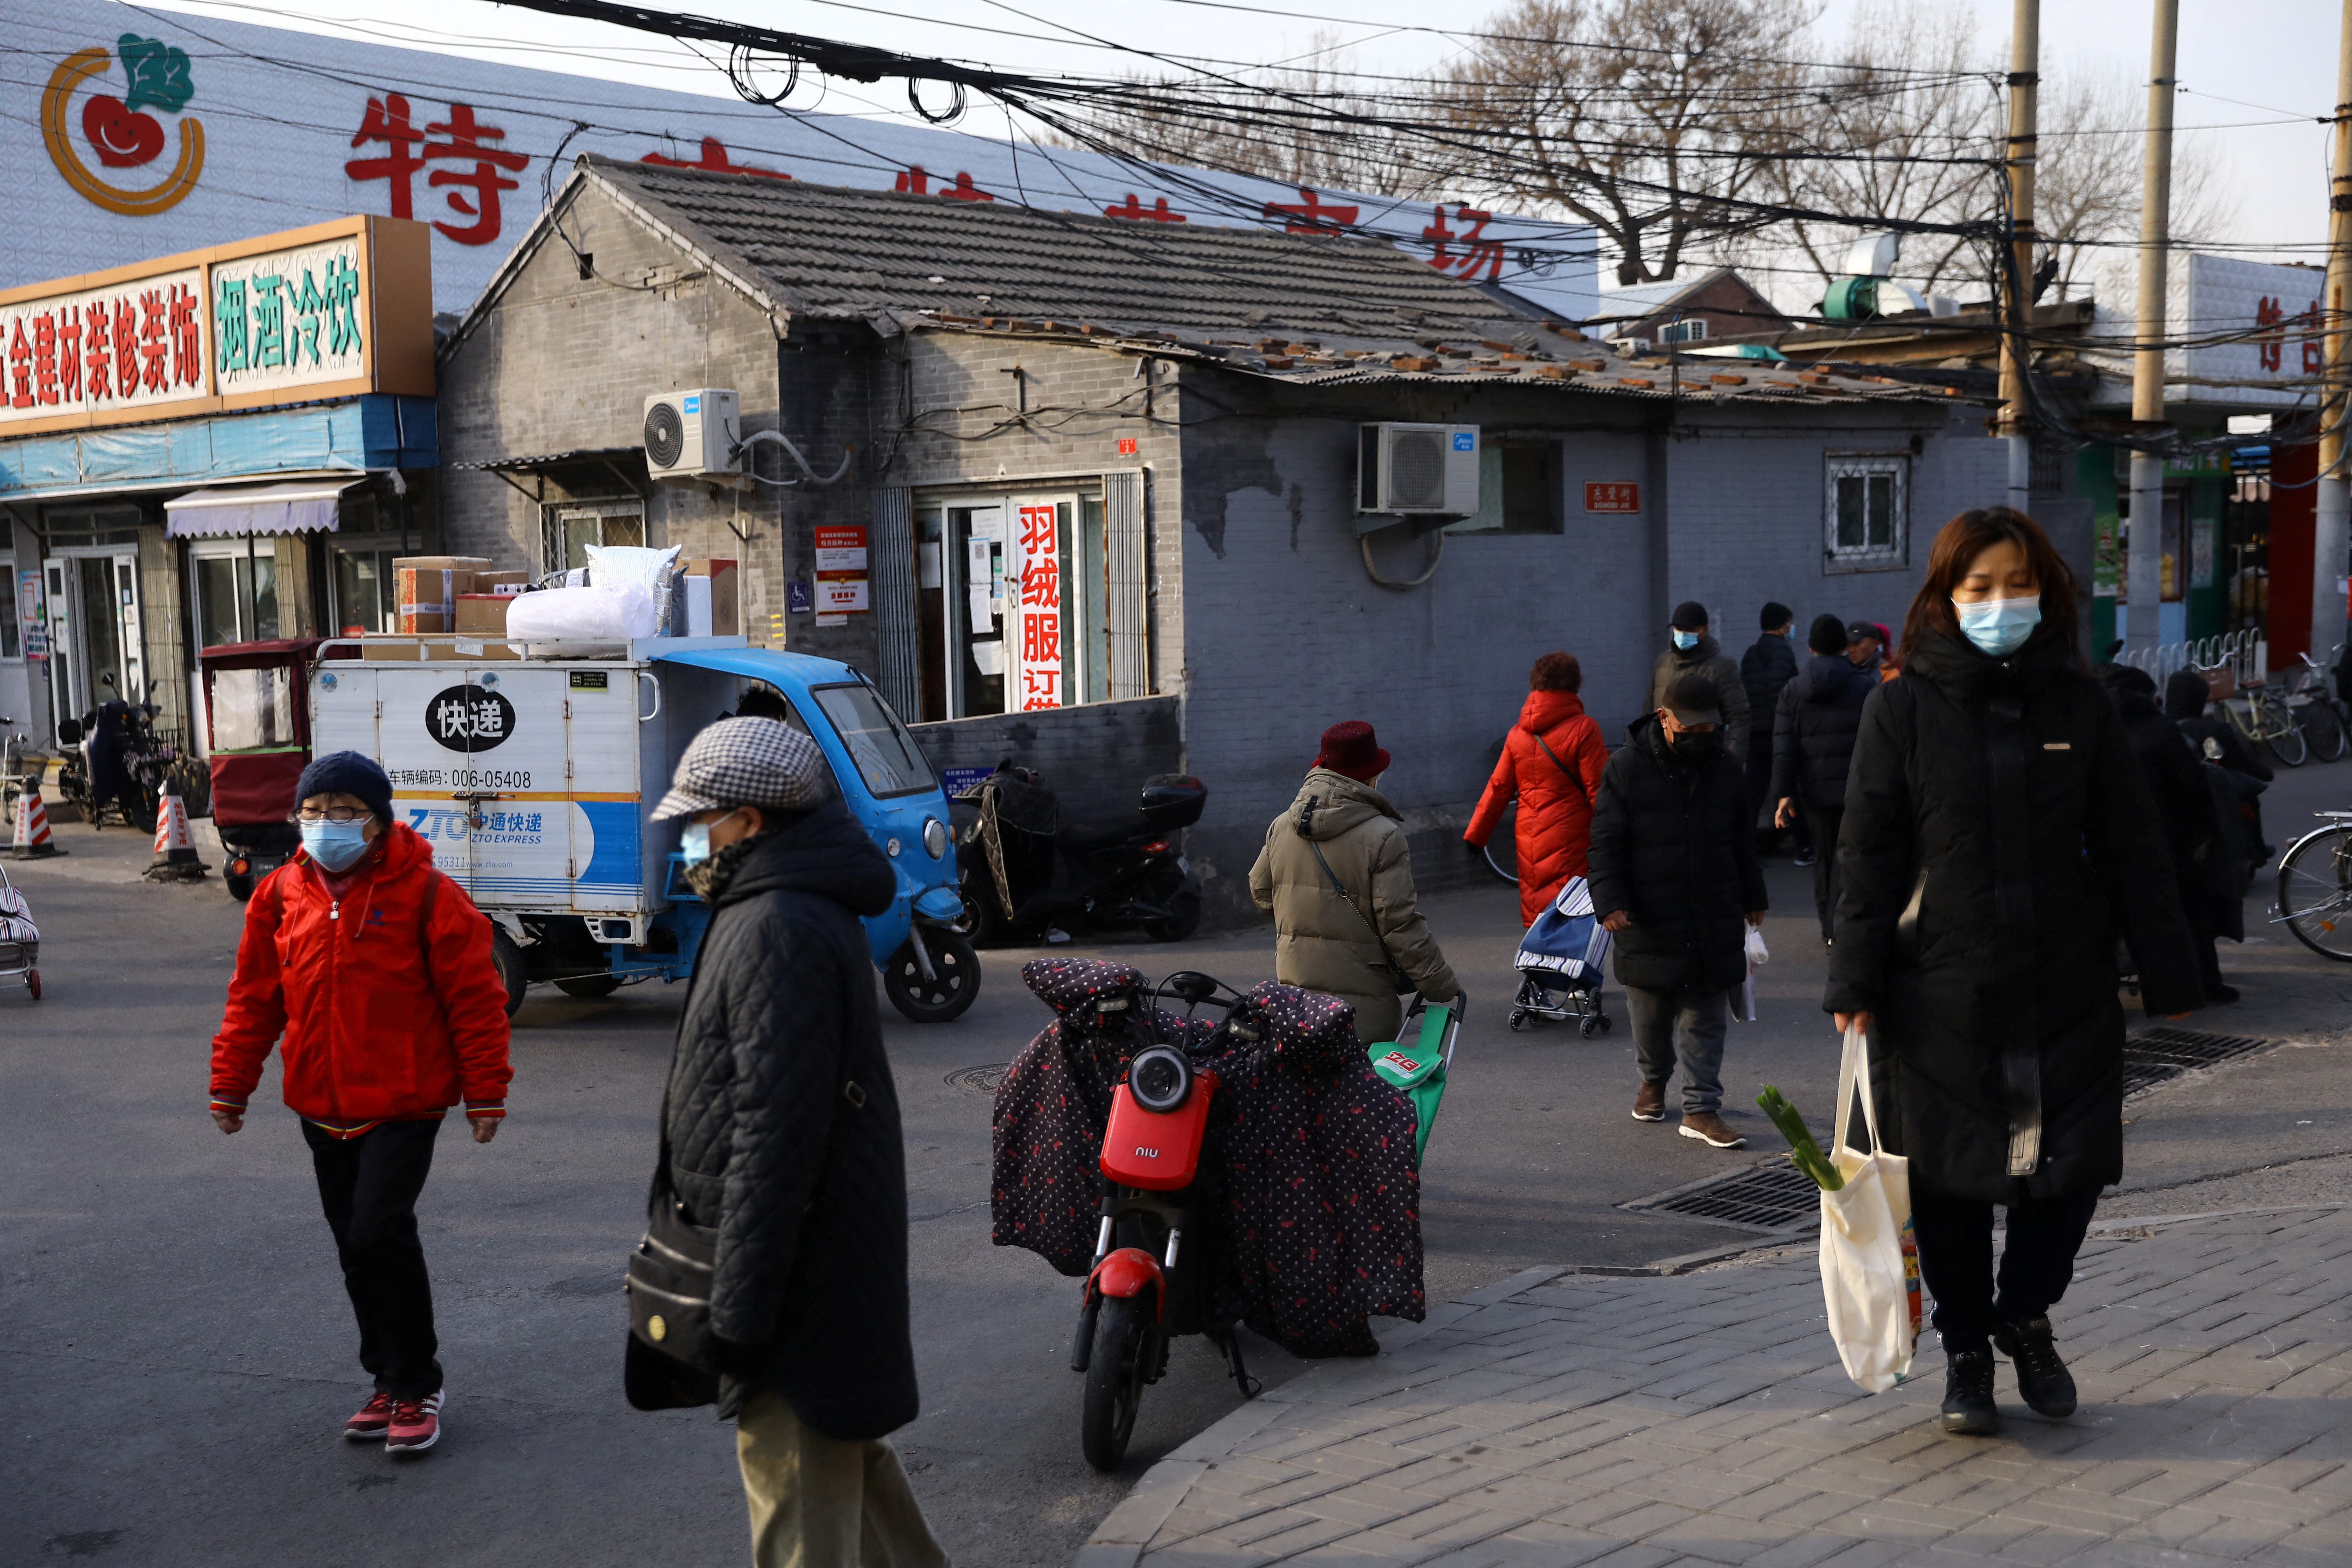 People walk on a street, as the coronavirus disease (COVID-19) pandemic continues in the country, in Beijing, China January 14, 2022. REUTERS/Tingshu Wang